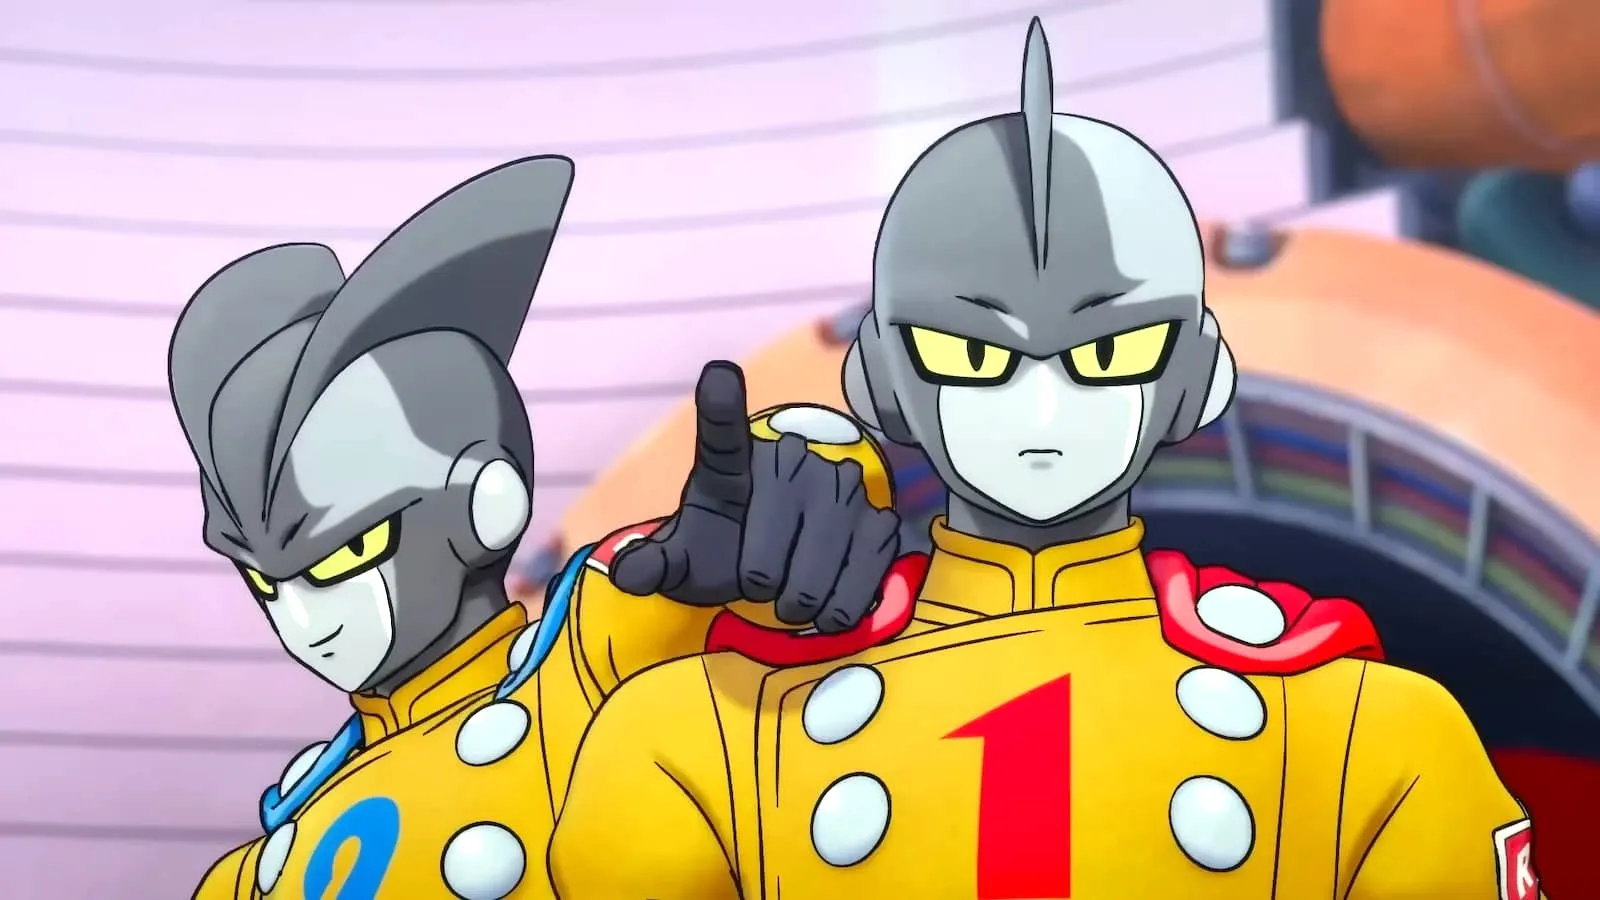 Animated image of 'Dragon Ball Super Super Hero' series' Gamma 1 and Gamma 2 standing side by side